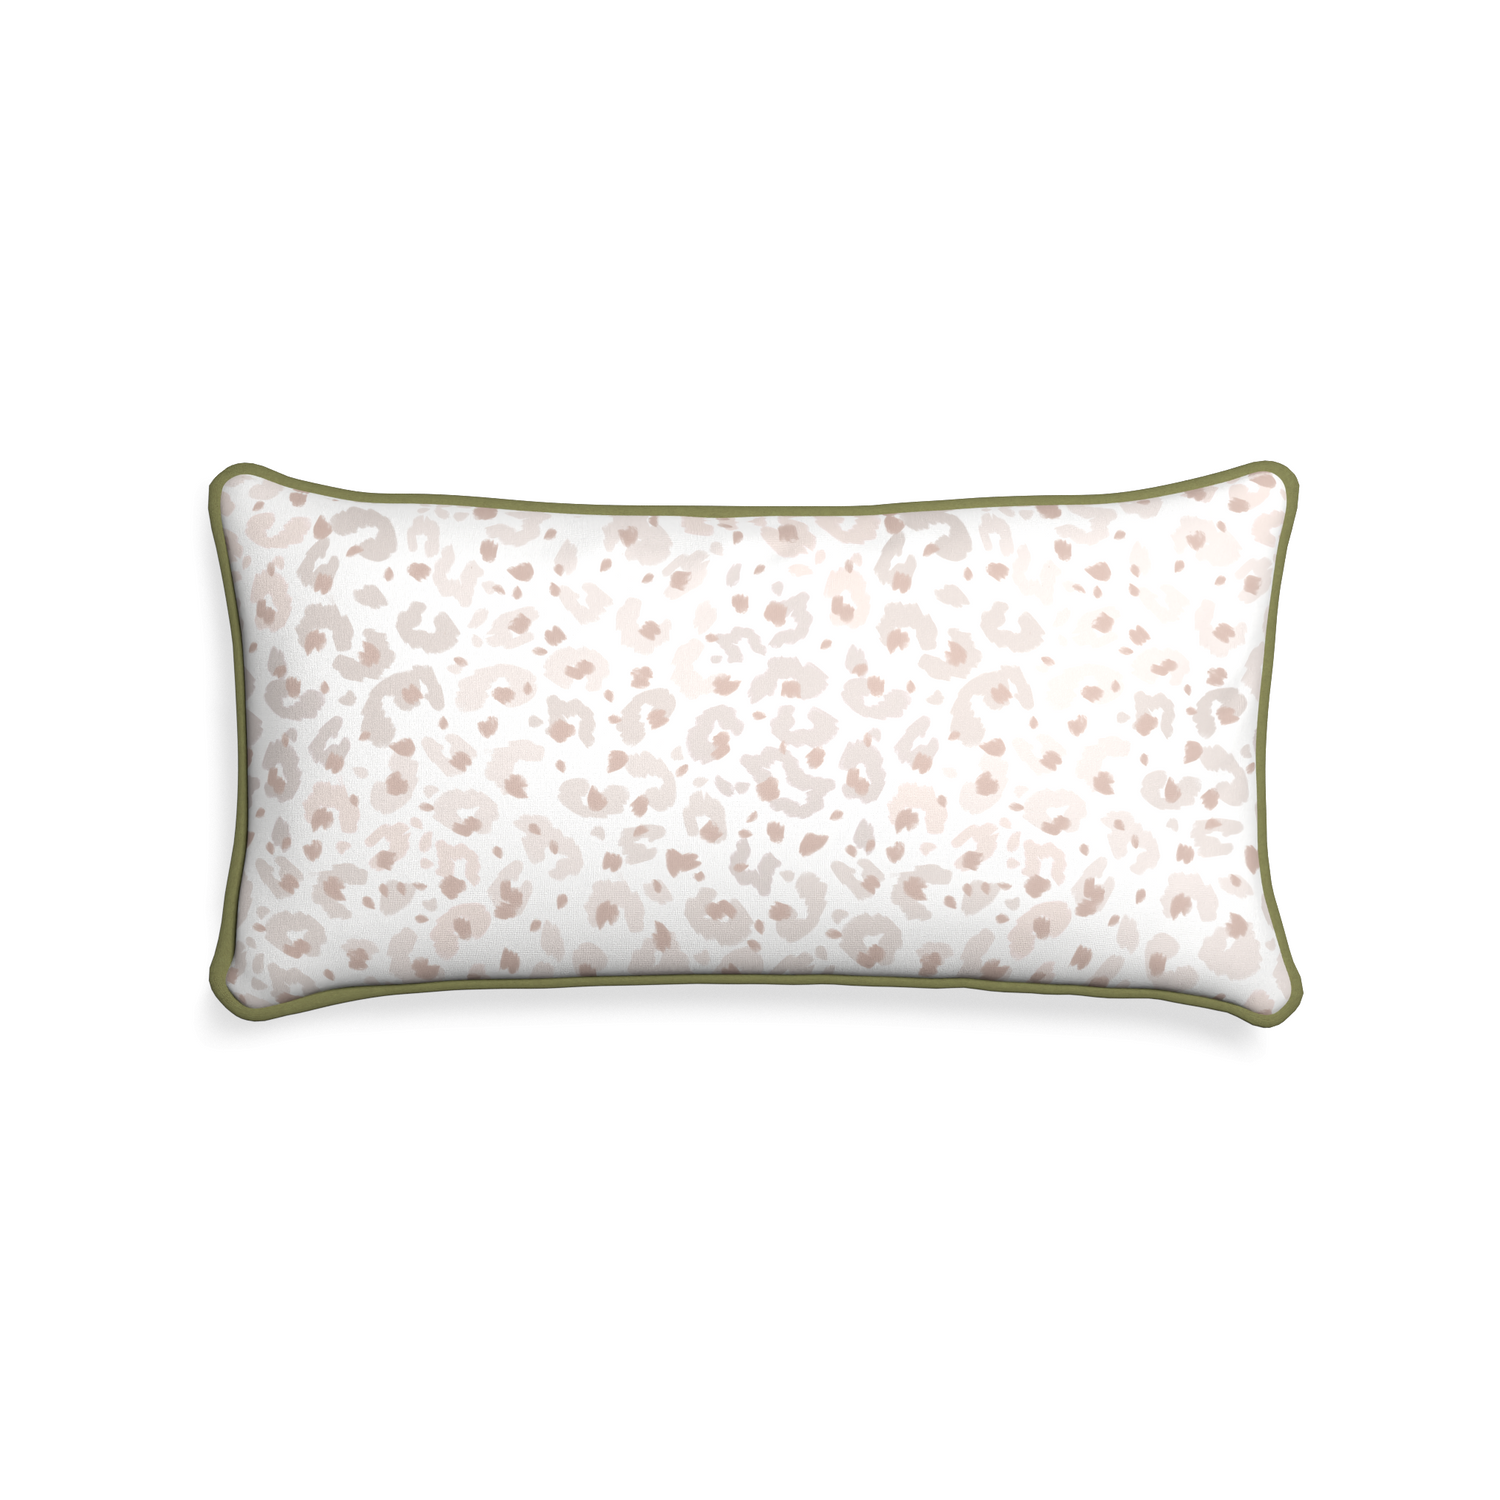 rectangle beige animal print pillow with moss green piping